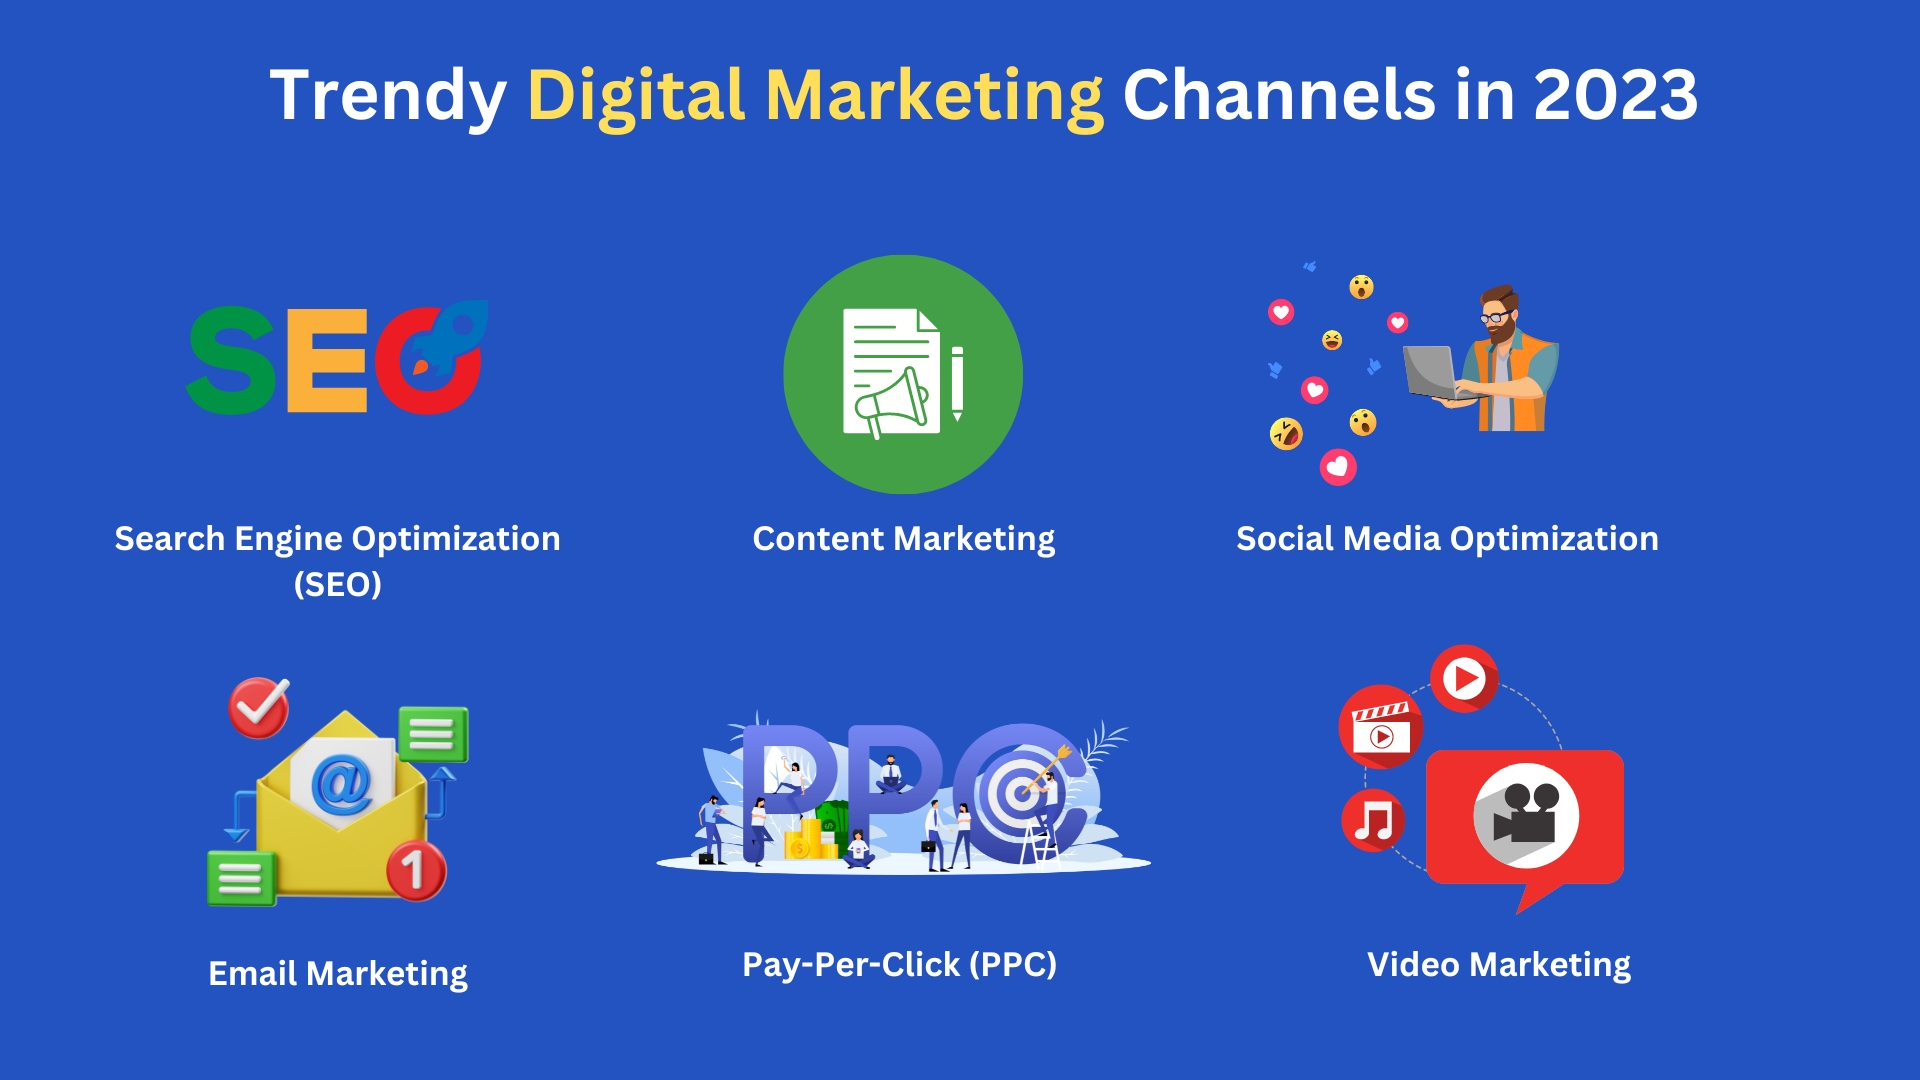 Focus on Top Digital Marketing Channels for Your Business in 2023